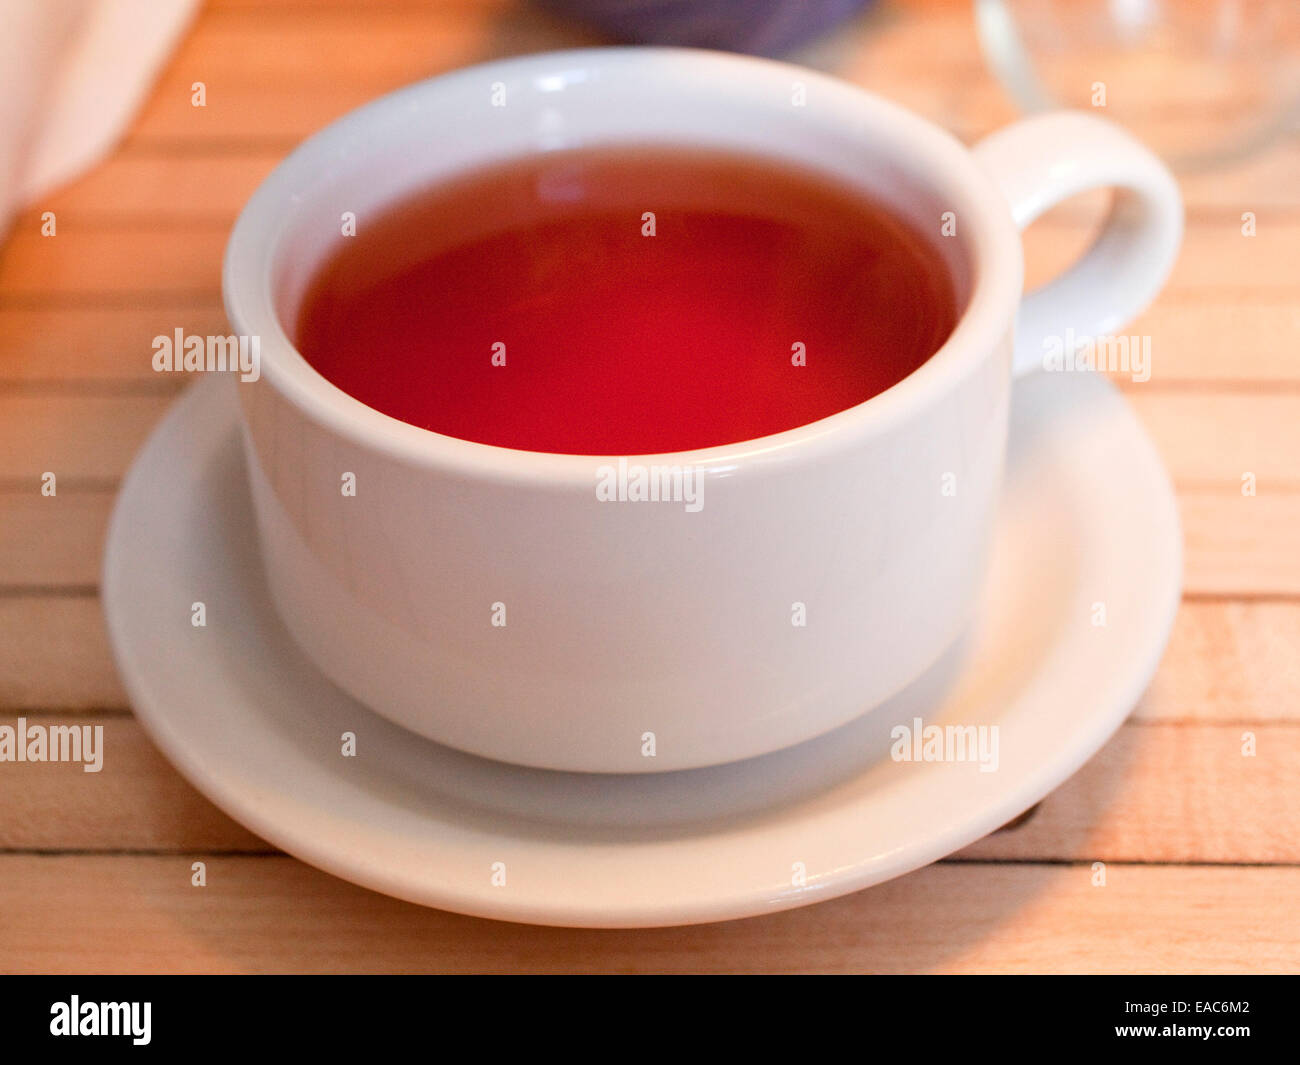 detail full cup of tea on wooden table Stock Photo